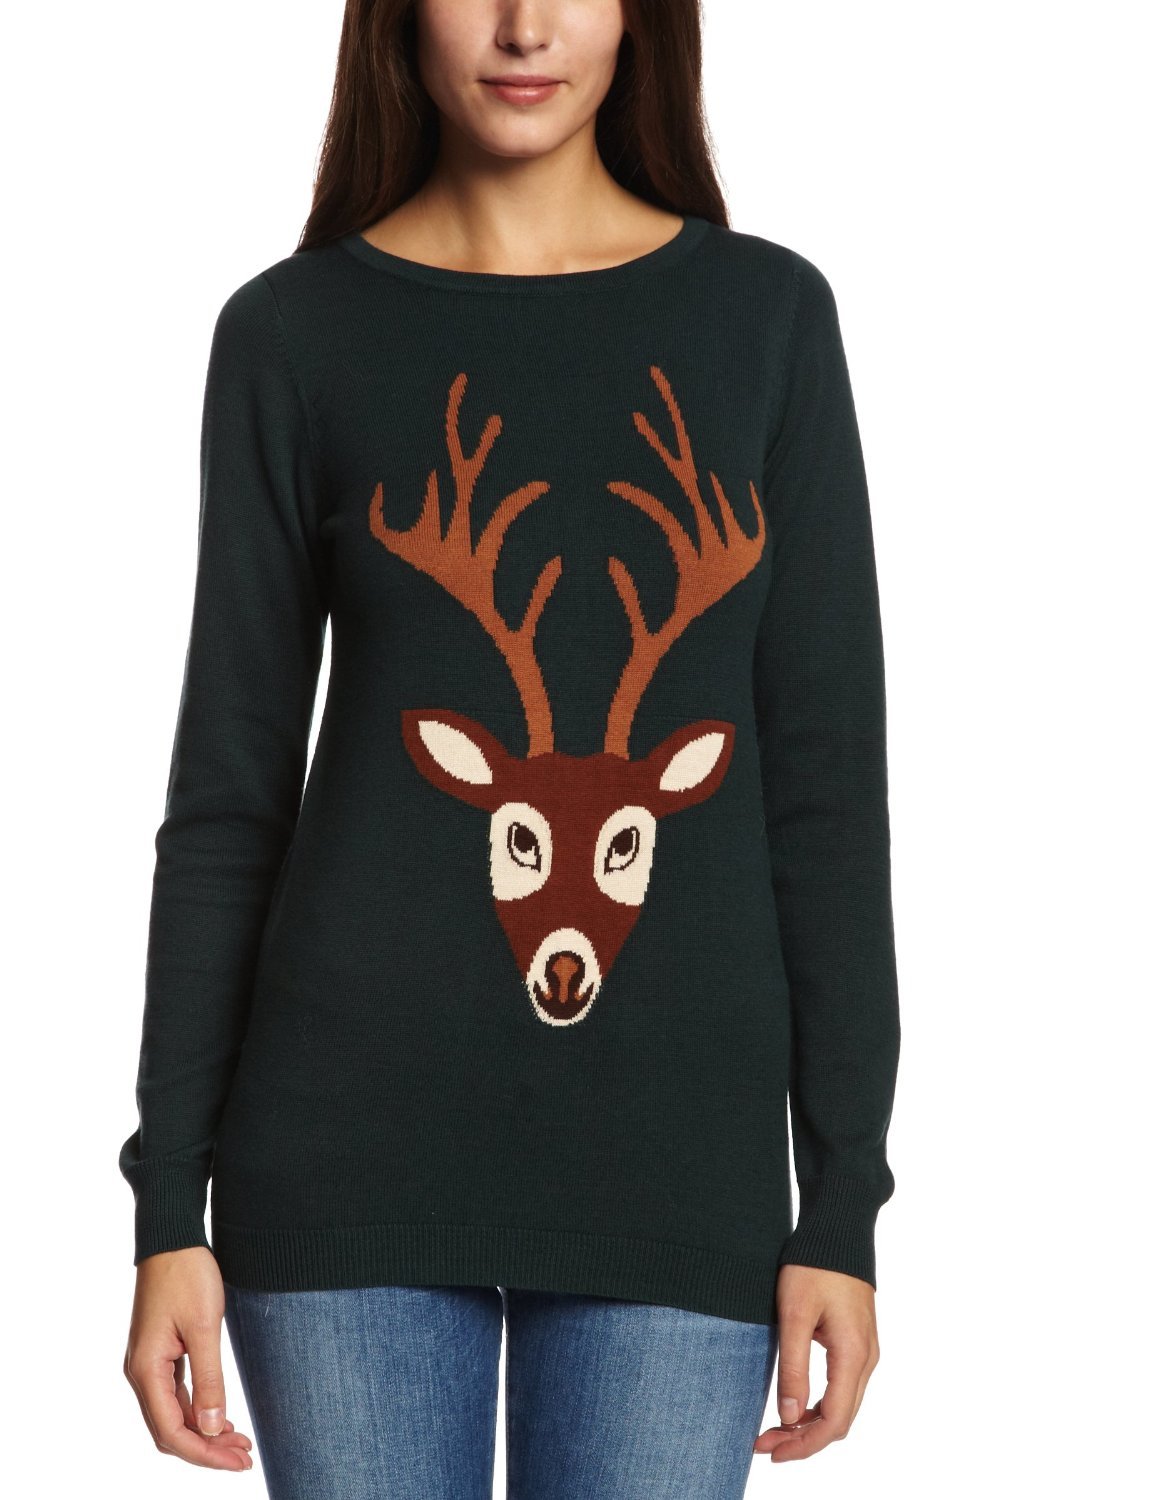 Get the LOOK, get the stag jumper! - What To Wear Post